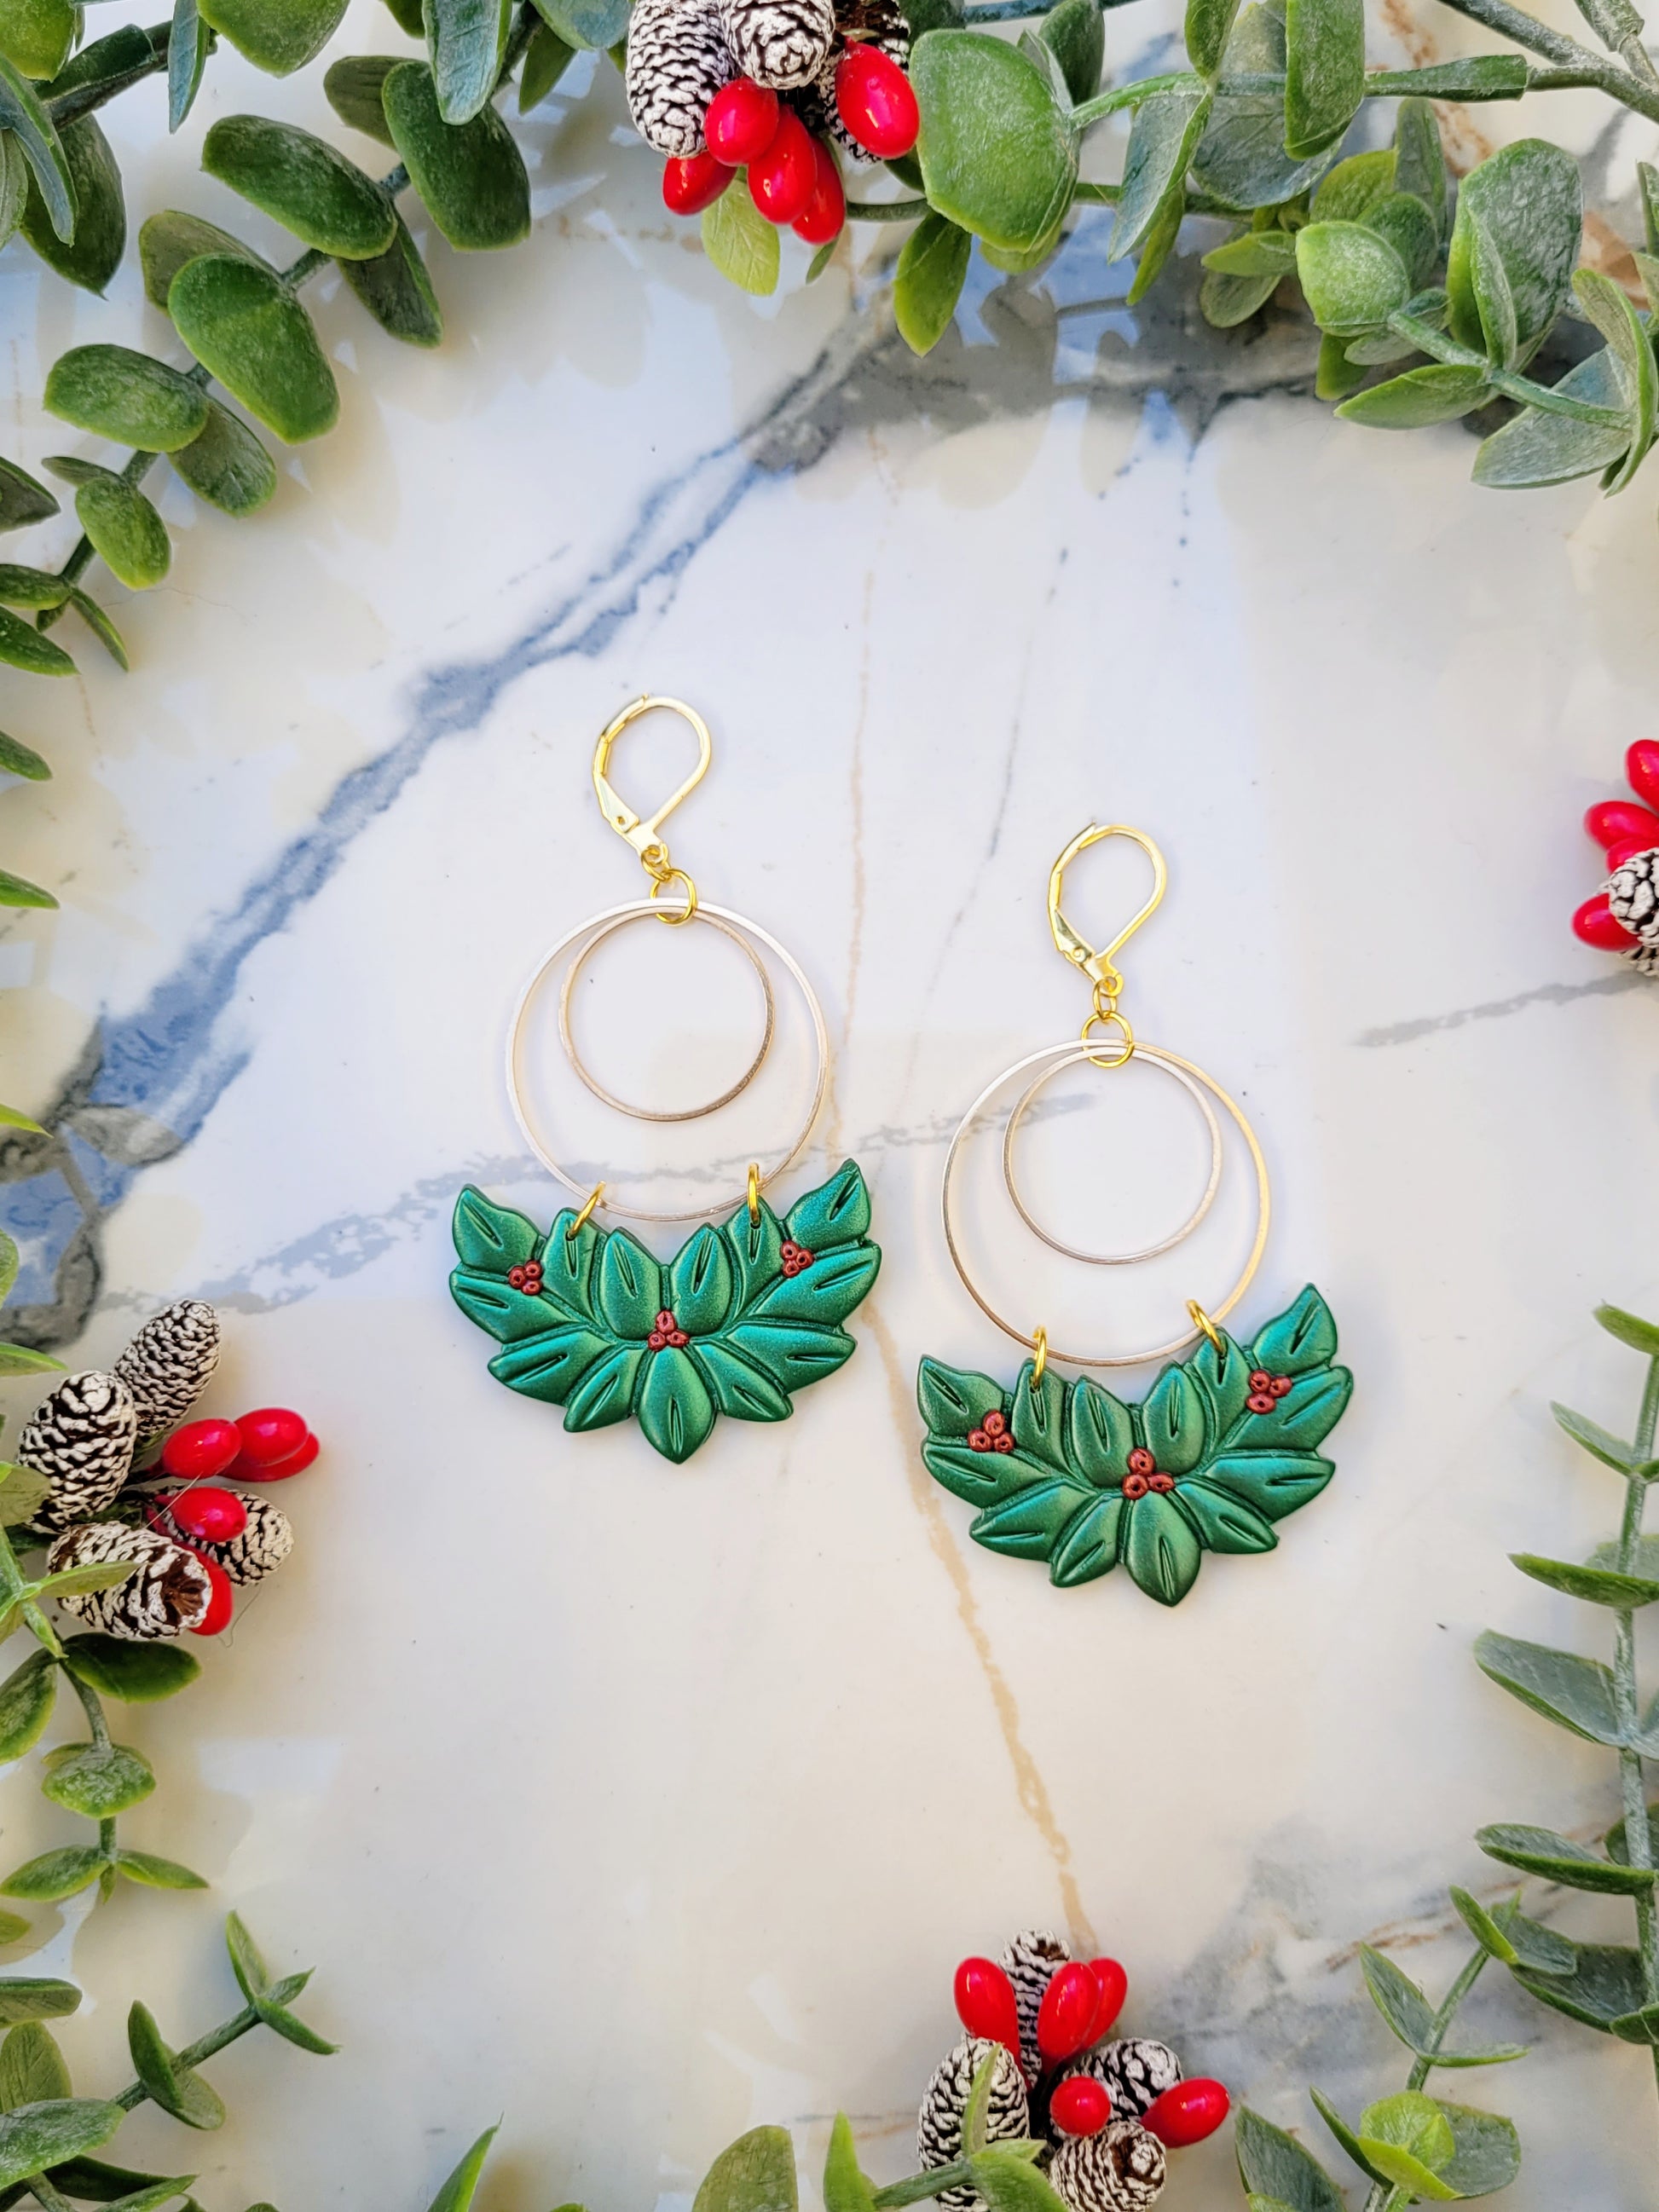 close up of Holly wreath earrings on a marble background surrounded by foliage.